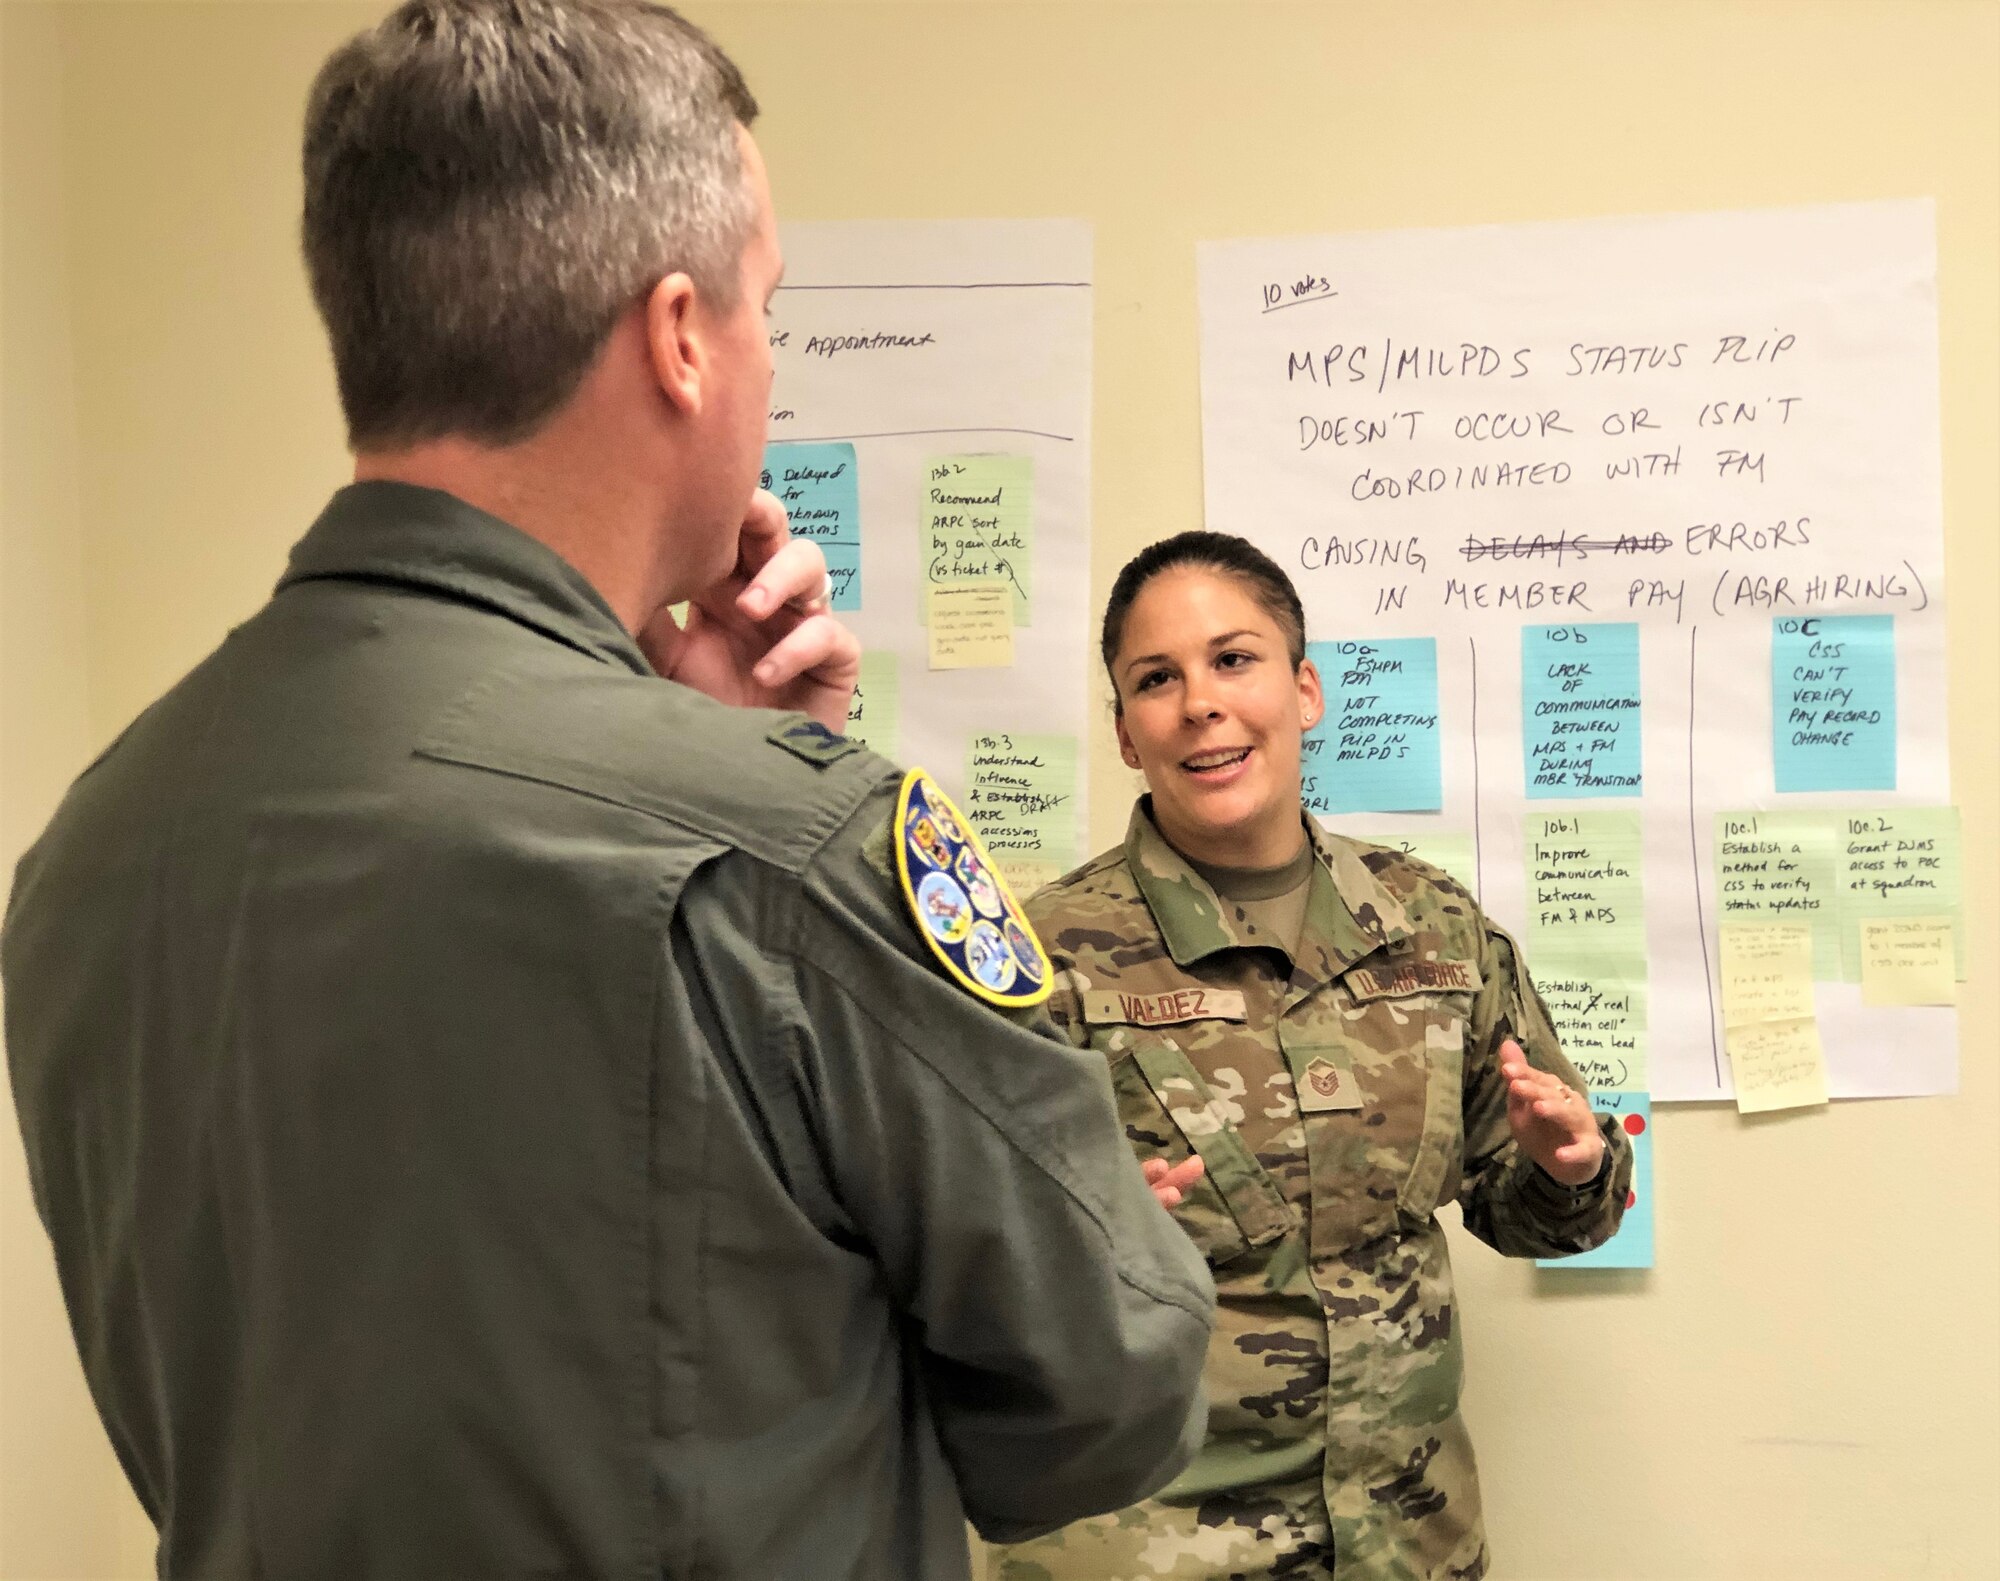 Master Sgt. Valerie Valdes, personnel programs section chief, 39th Flying Training Squadron, Joint Base San Antonio-Randolph, Texas, briefs Col. Brent Drown, 340th Flying Training Group deputy commander following the Nov. 19-21 continuous process improvement event held to address pay issues that occur when Reserve members transition between pay statuses. Drown stood in for the improvement process champion, 340th FTG Commander, Col. Allen Duckworth. (U.S. Air Force photo by Janis El Shabazz)